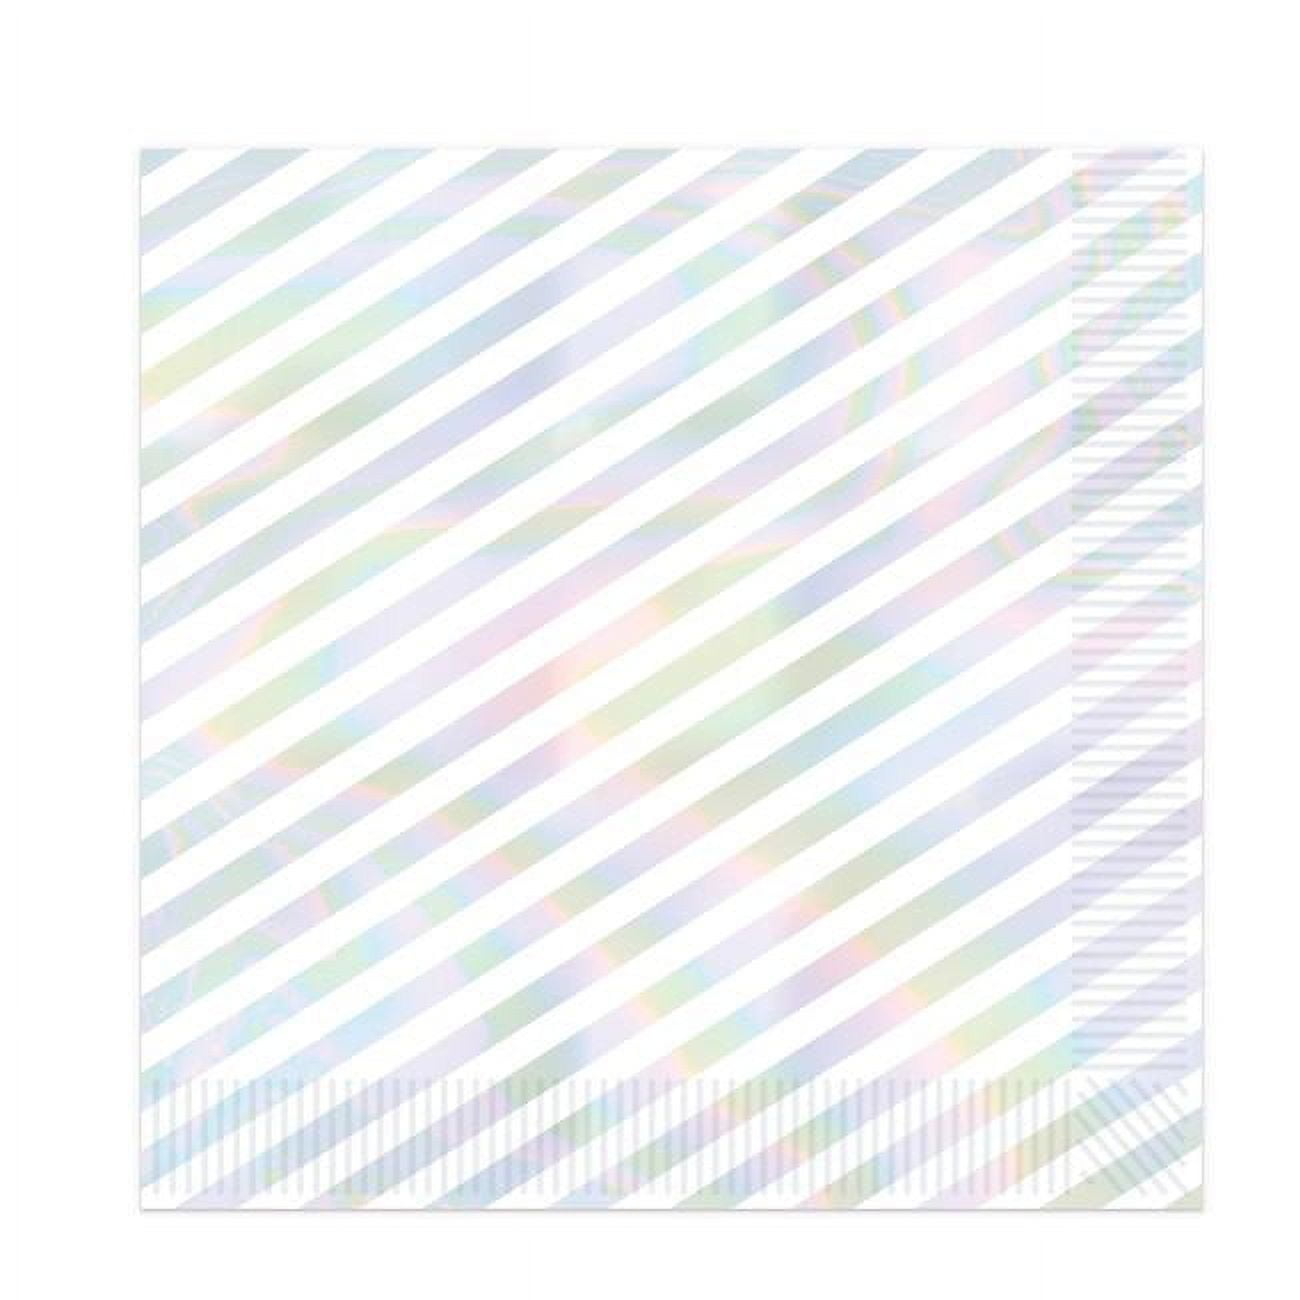 Picture of Beistle 53572 2-Ply Iridescent Stripes Beverage Napkins - Pack of 12